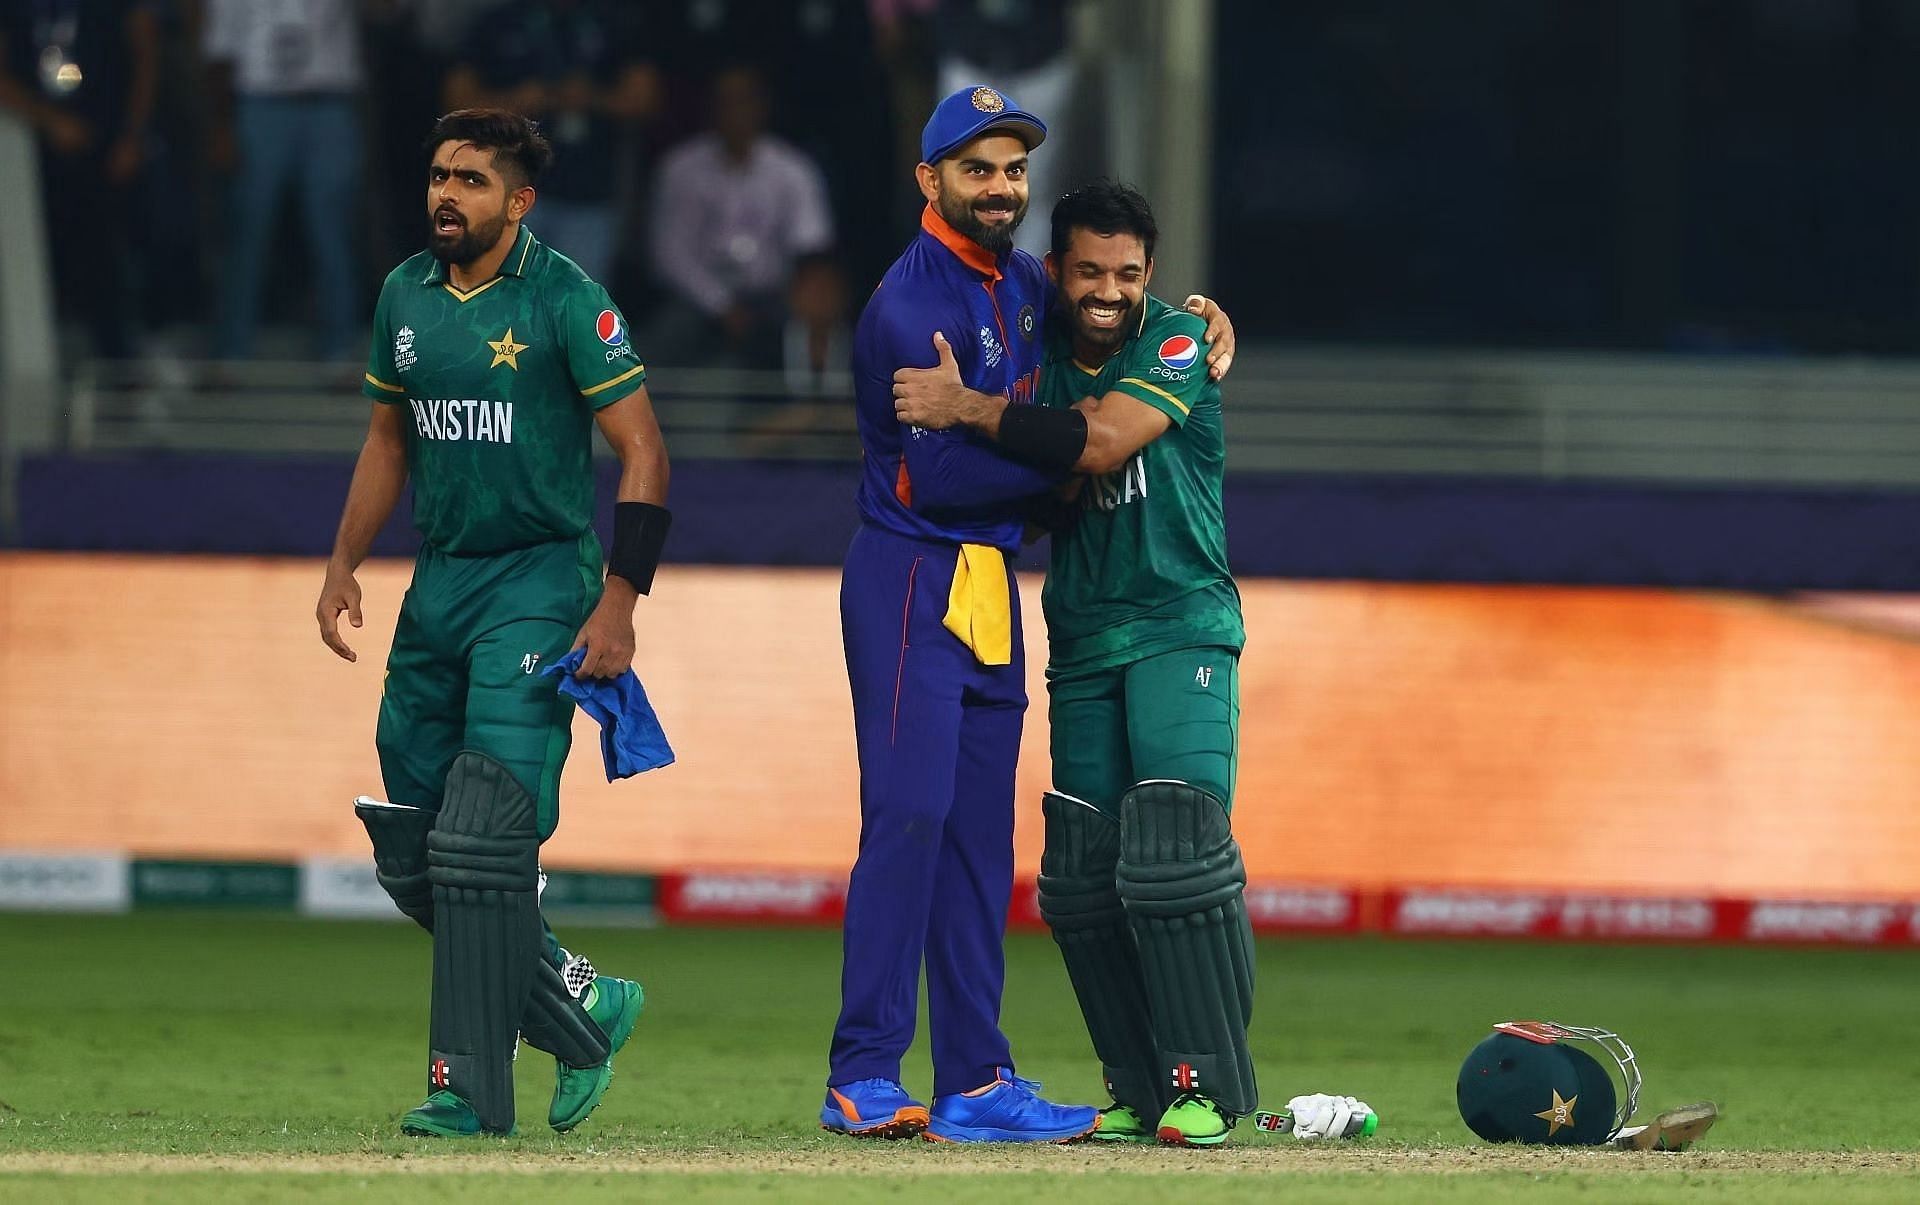 Pakistan defeated India in the 2021 T20 World Cup.